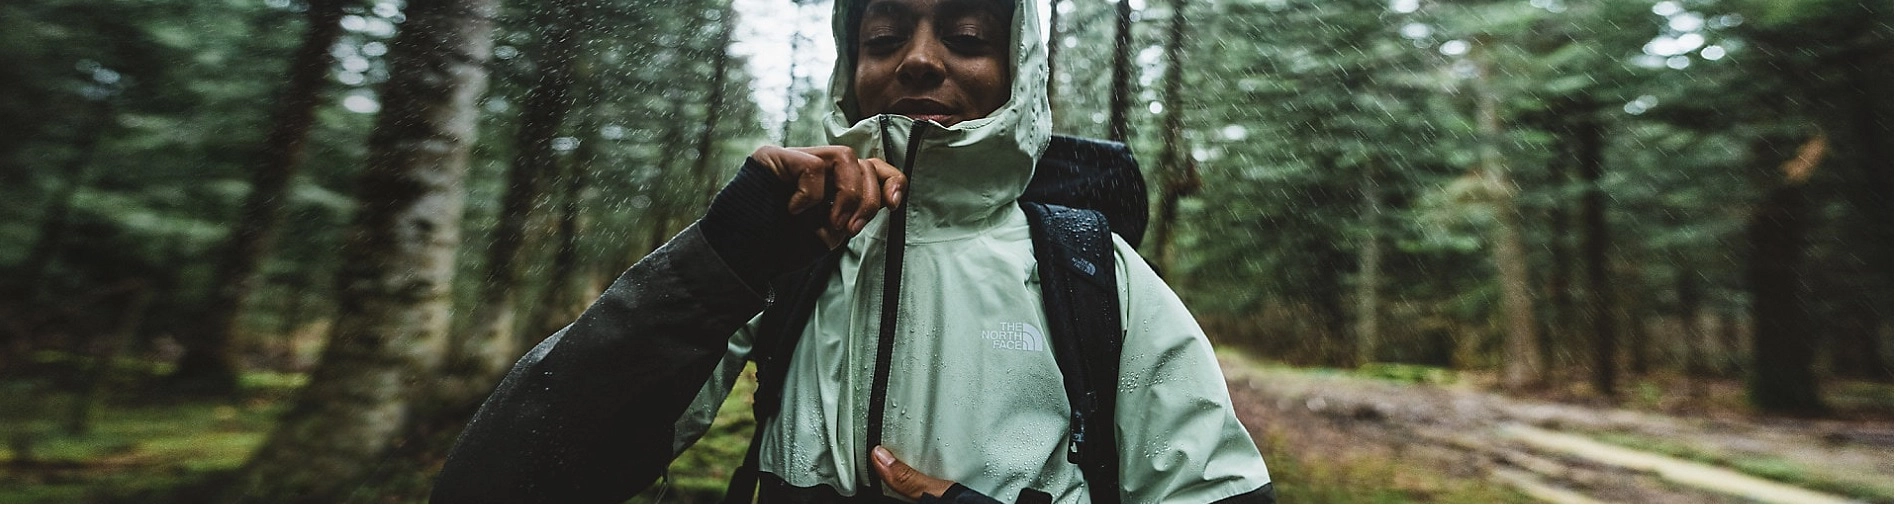 Shop The North Face